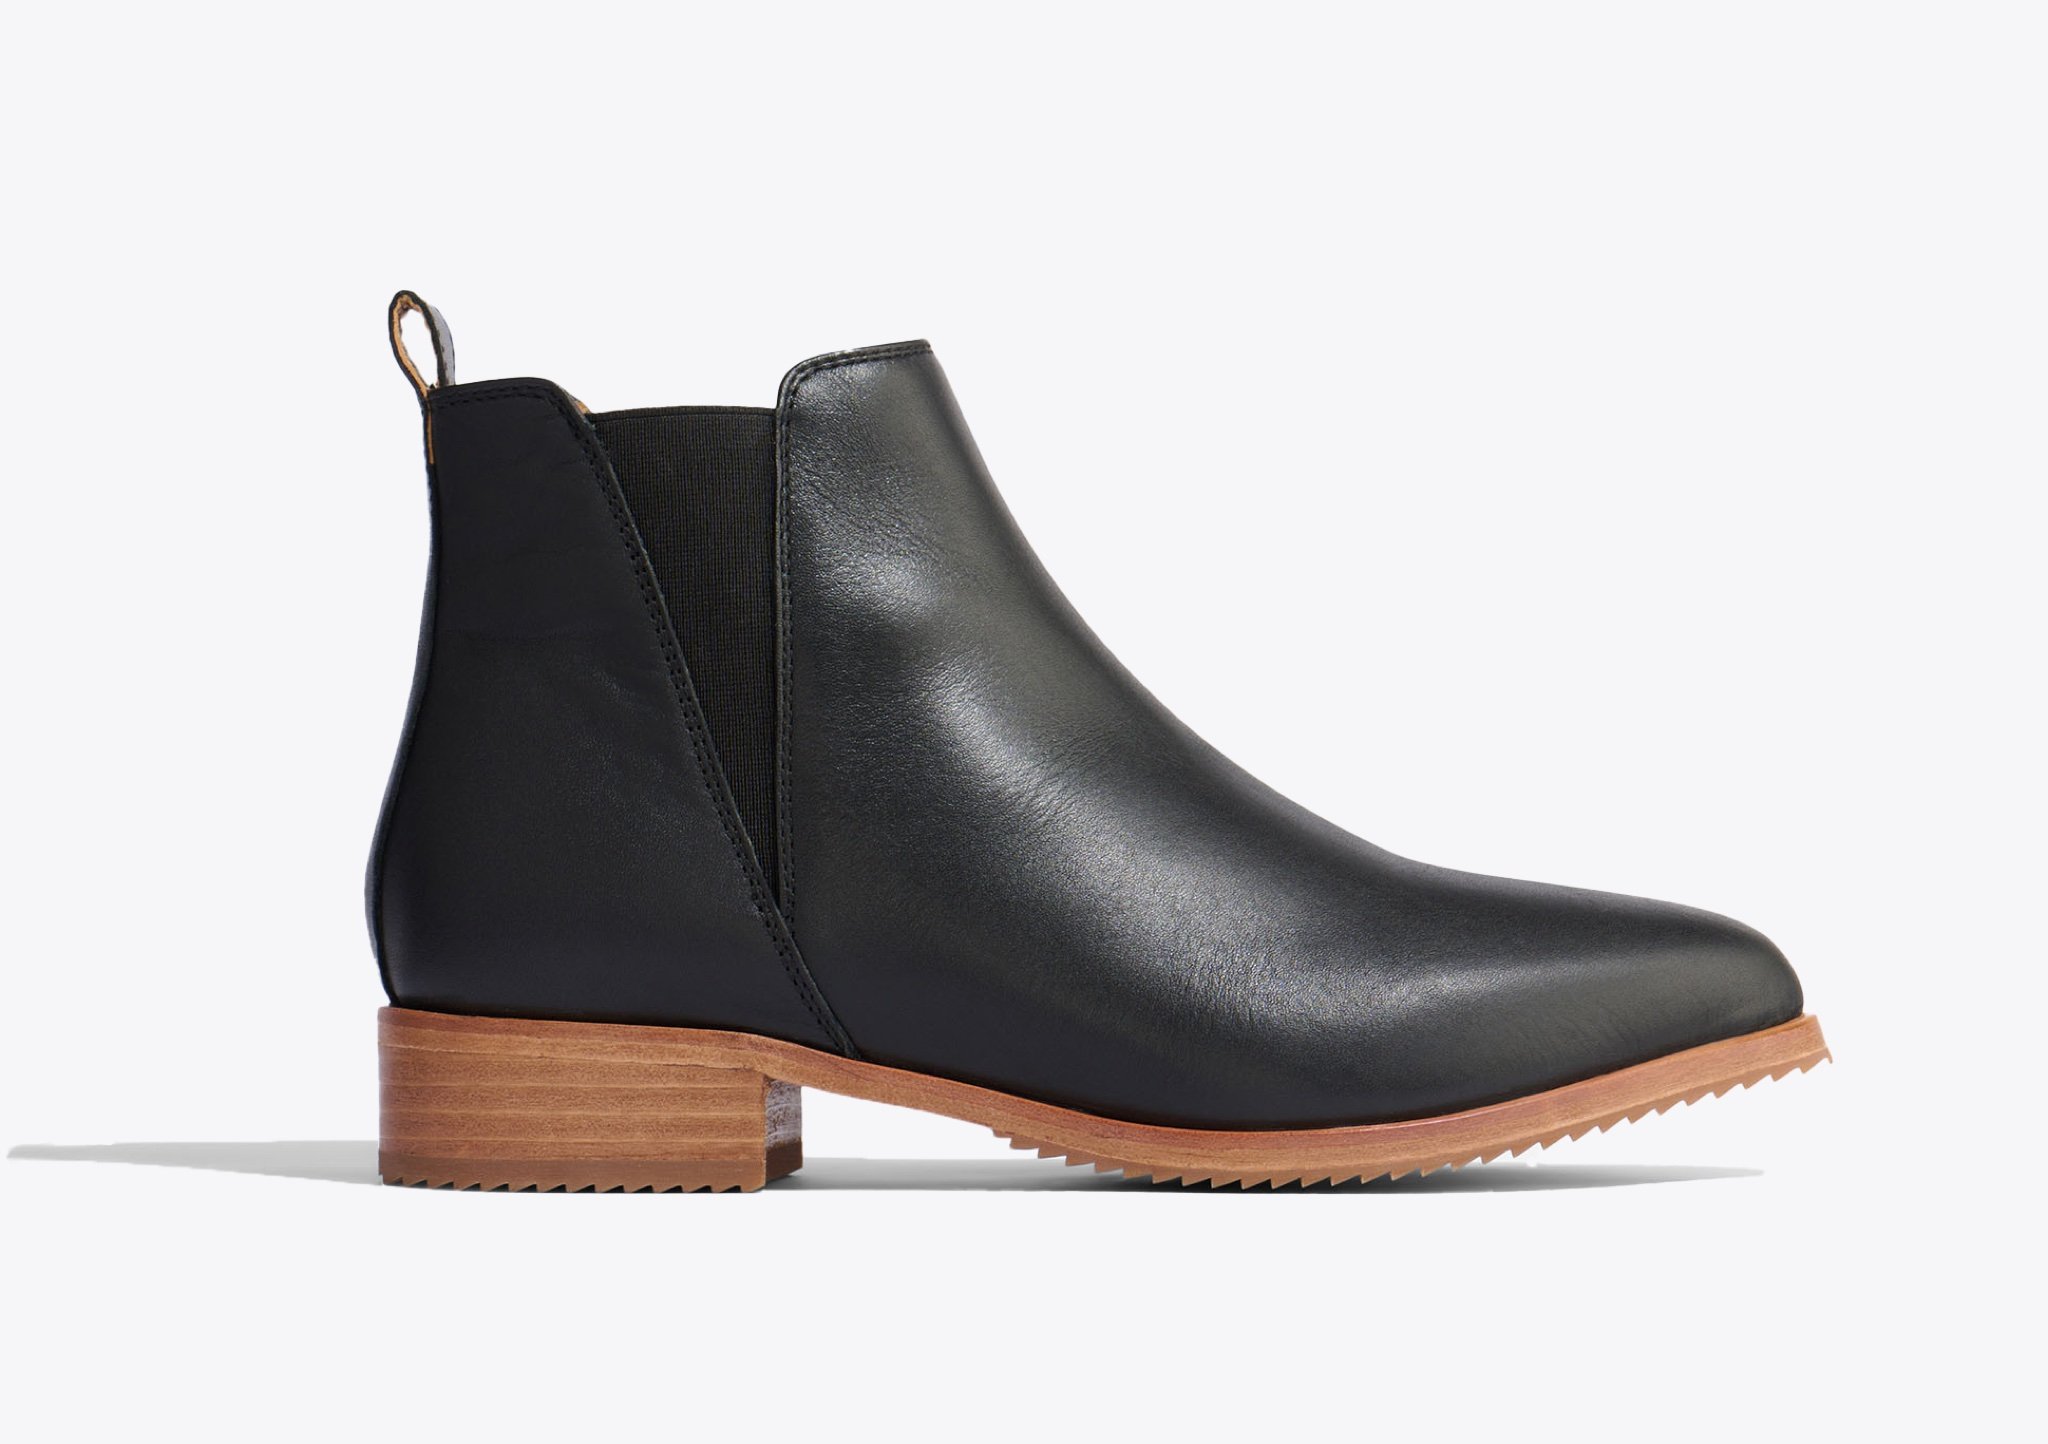 Nisolo Eva Everyday Chelsea Boot Black - Every Nisolo product is built on the foundation of comfort, function, and design. 